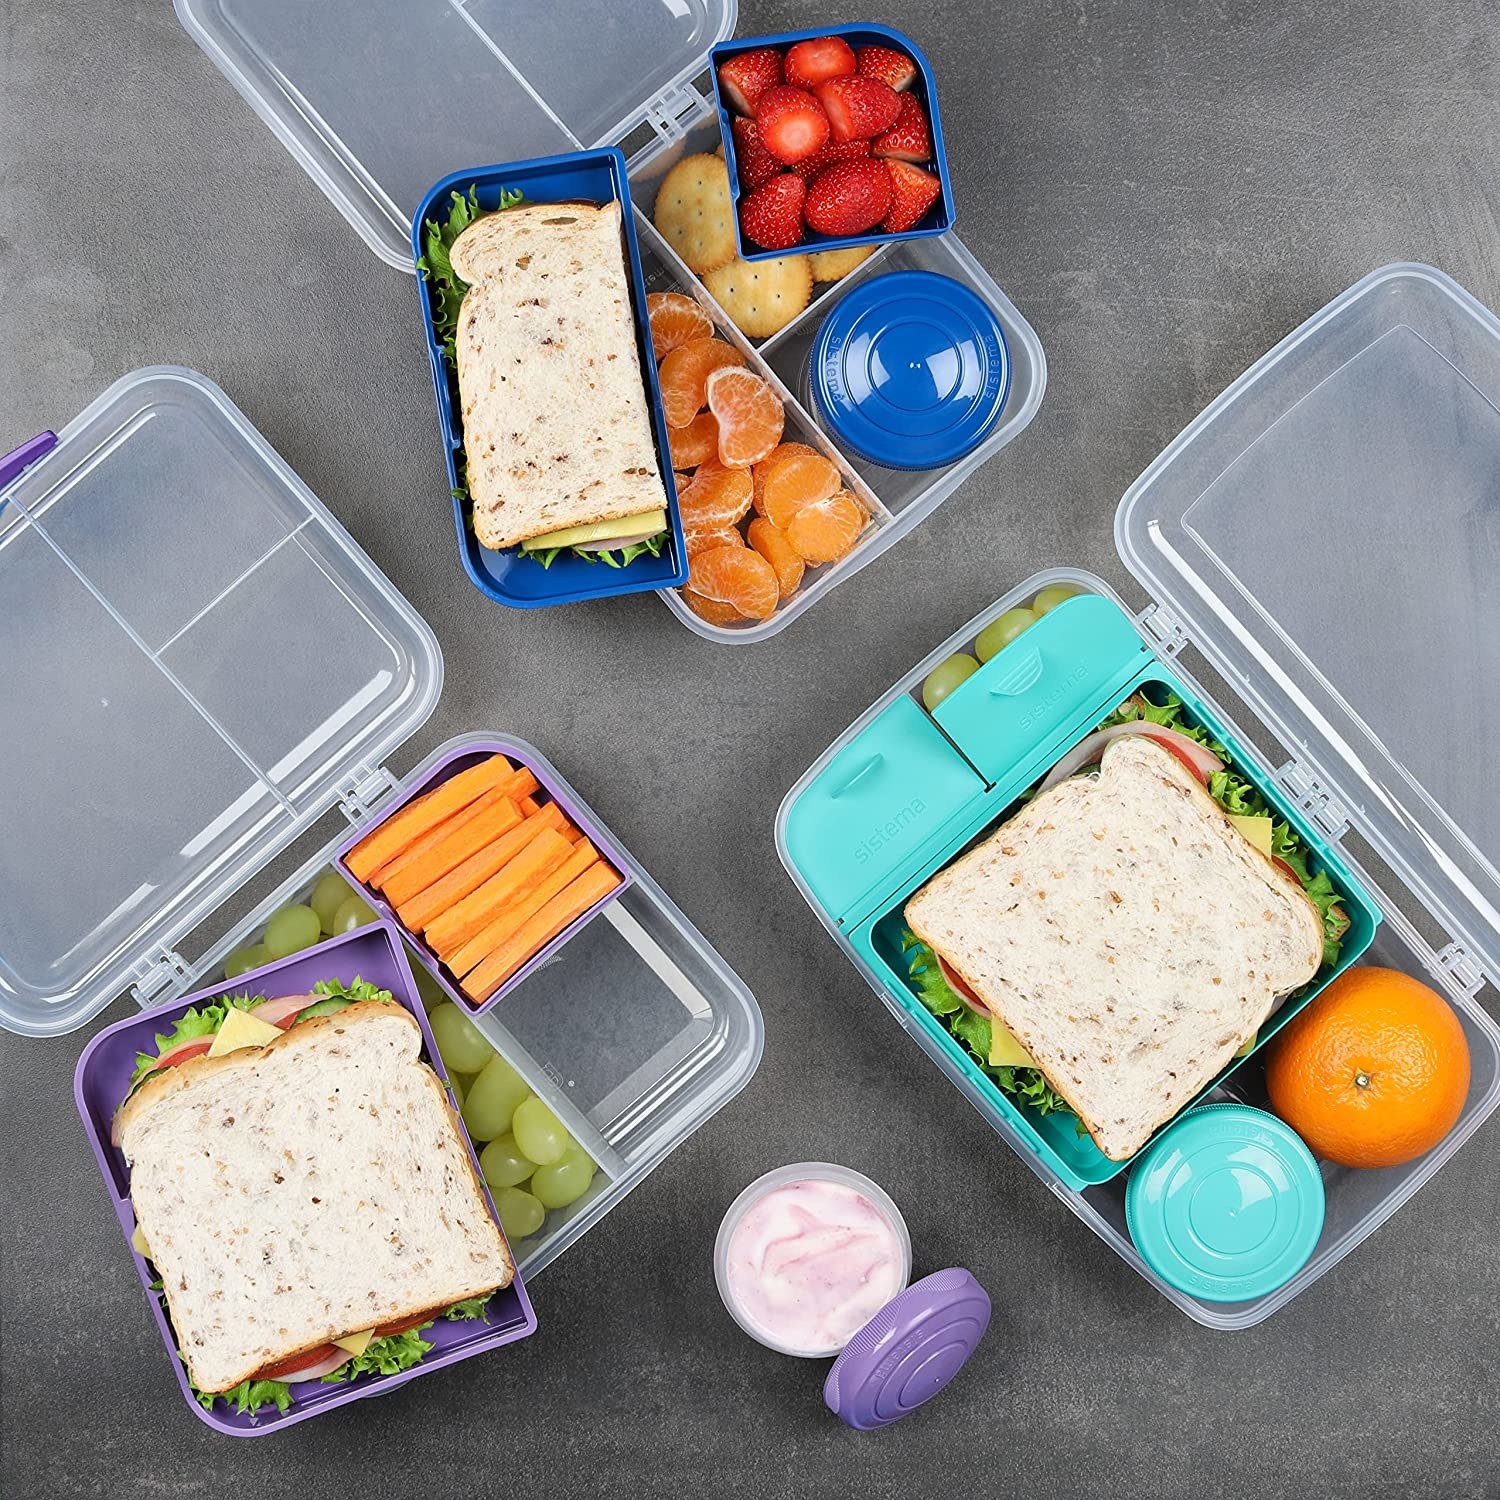 Three bento box food containers with sandwiches and fruit inside